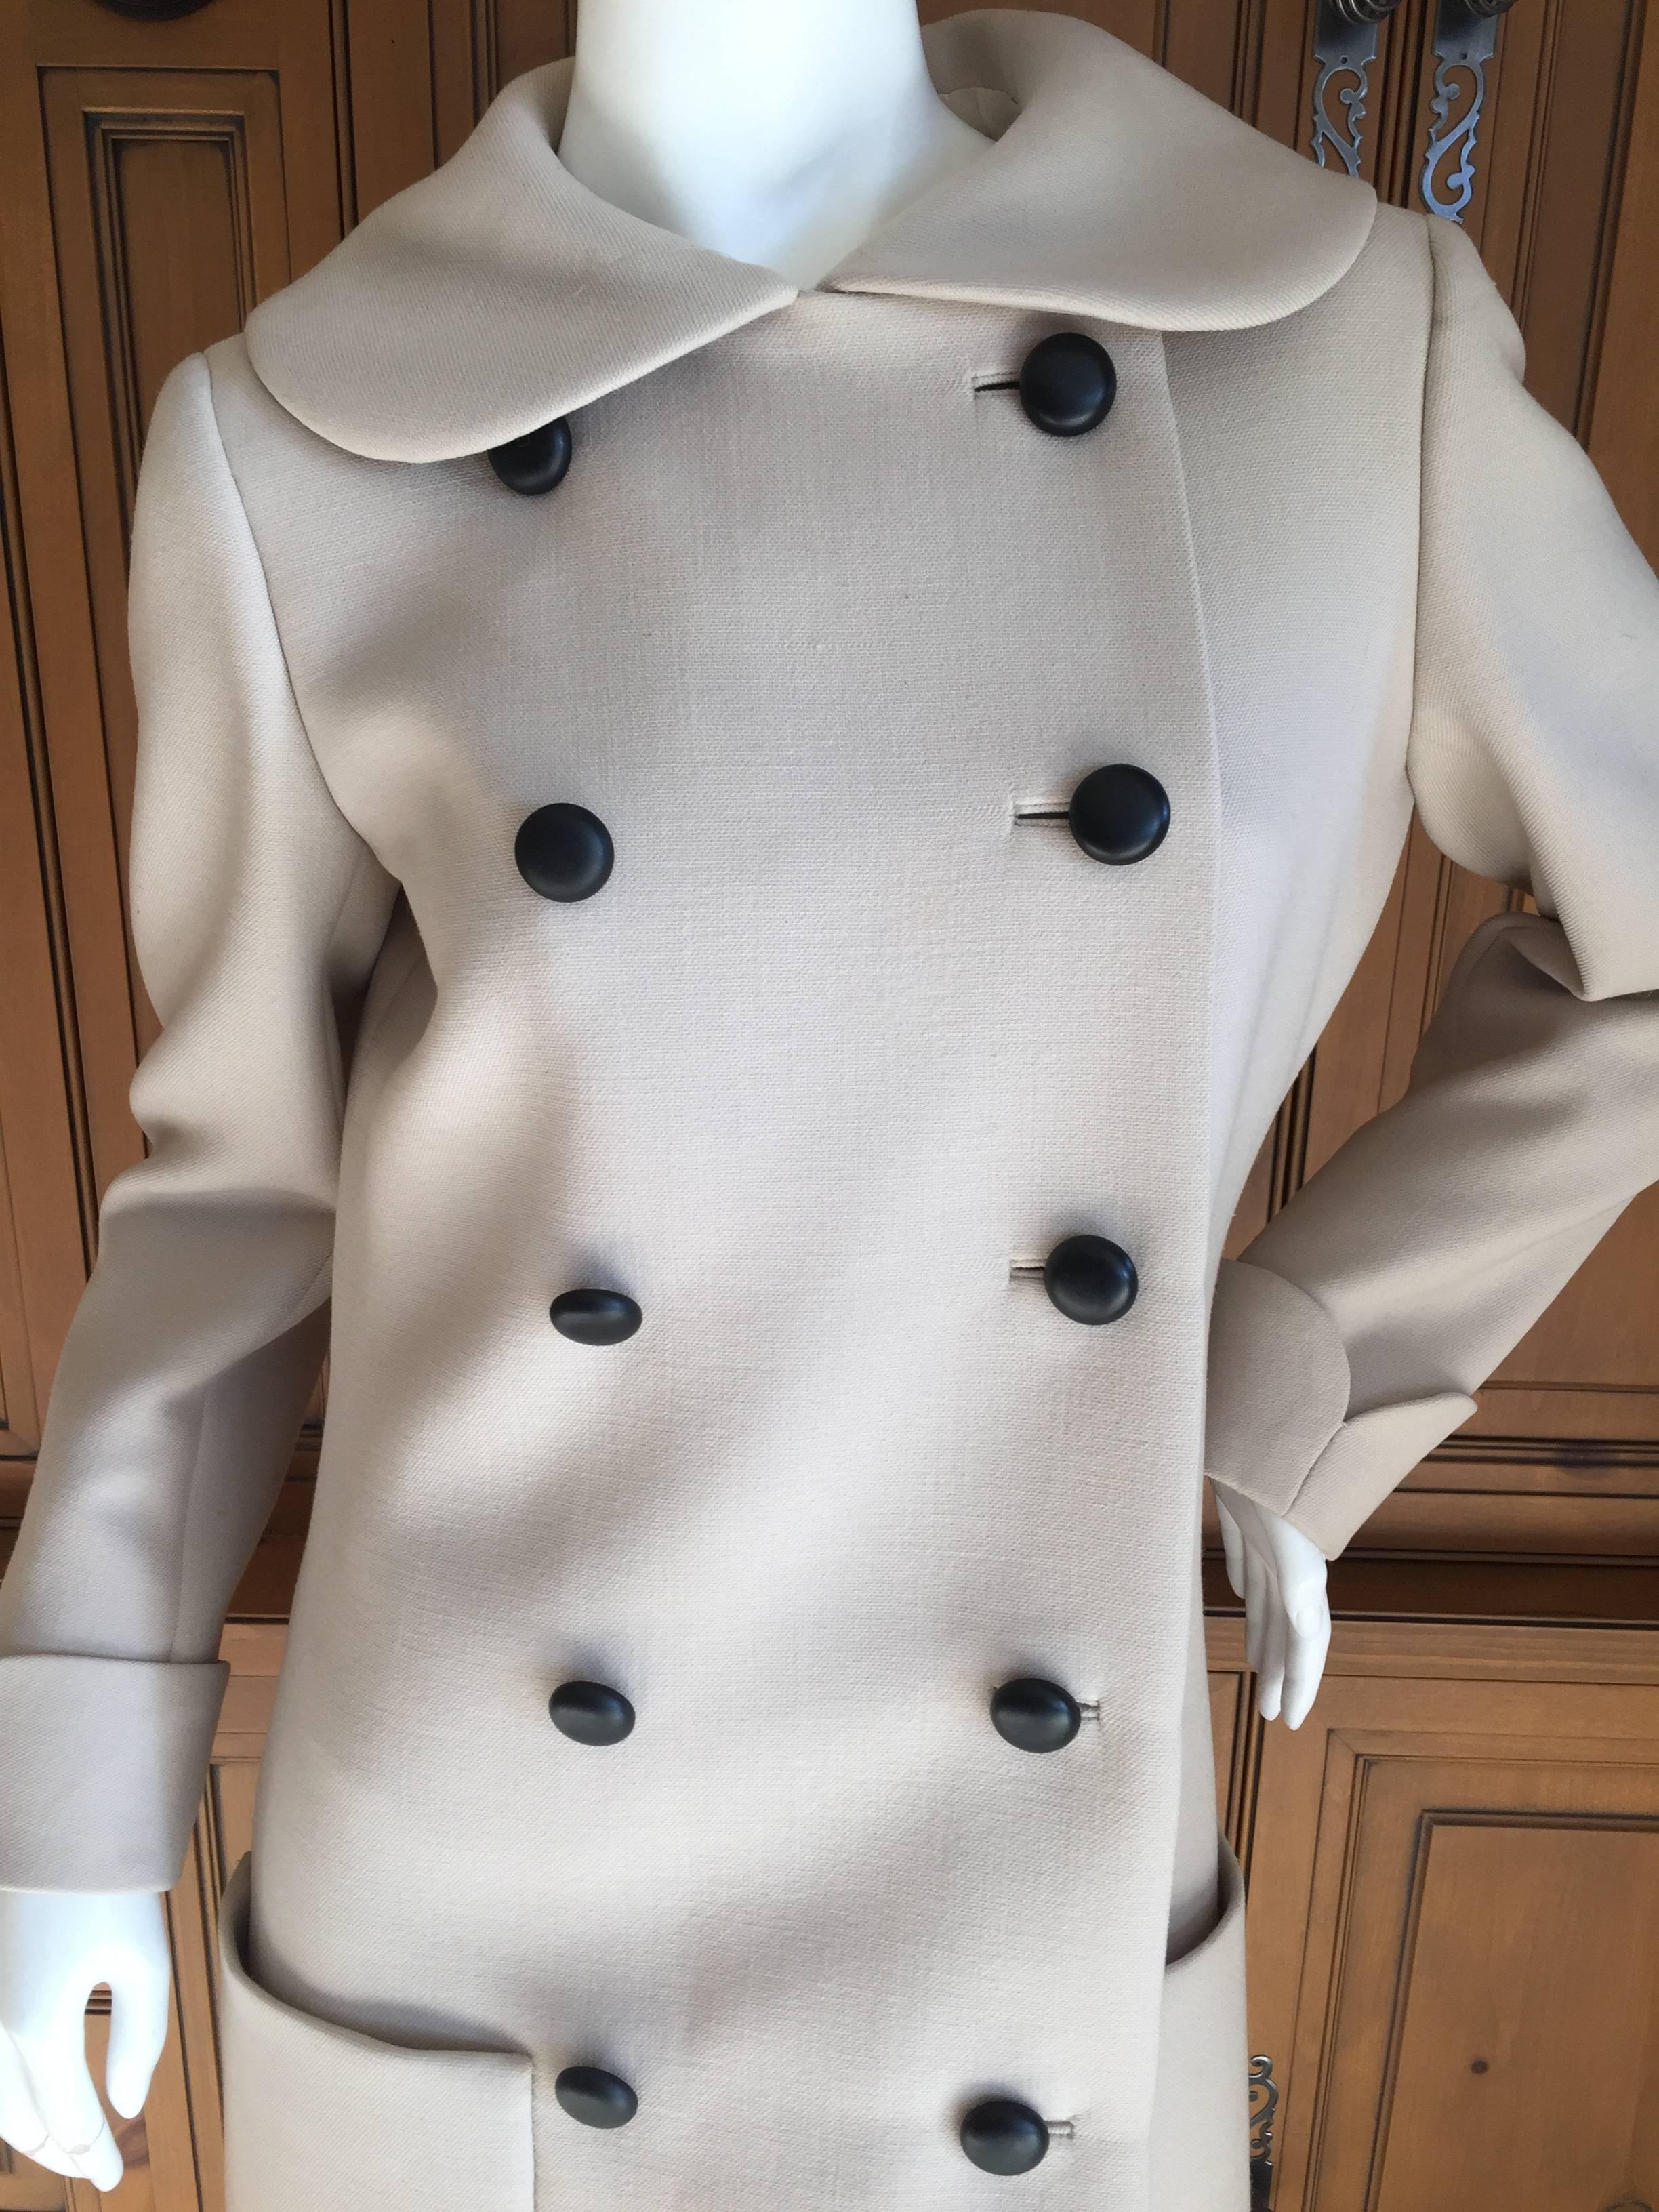 Delightful 1960's tan wool peacoat from Norman Norell.
Lined in silk taffeta with working sleeve buttons.
Bust 39